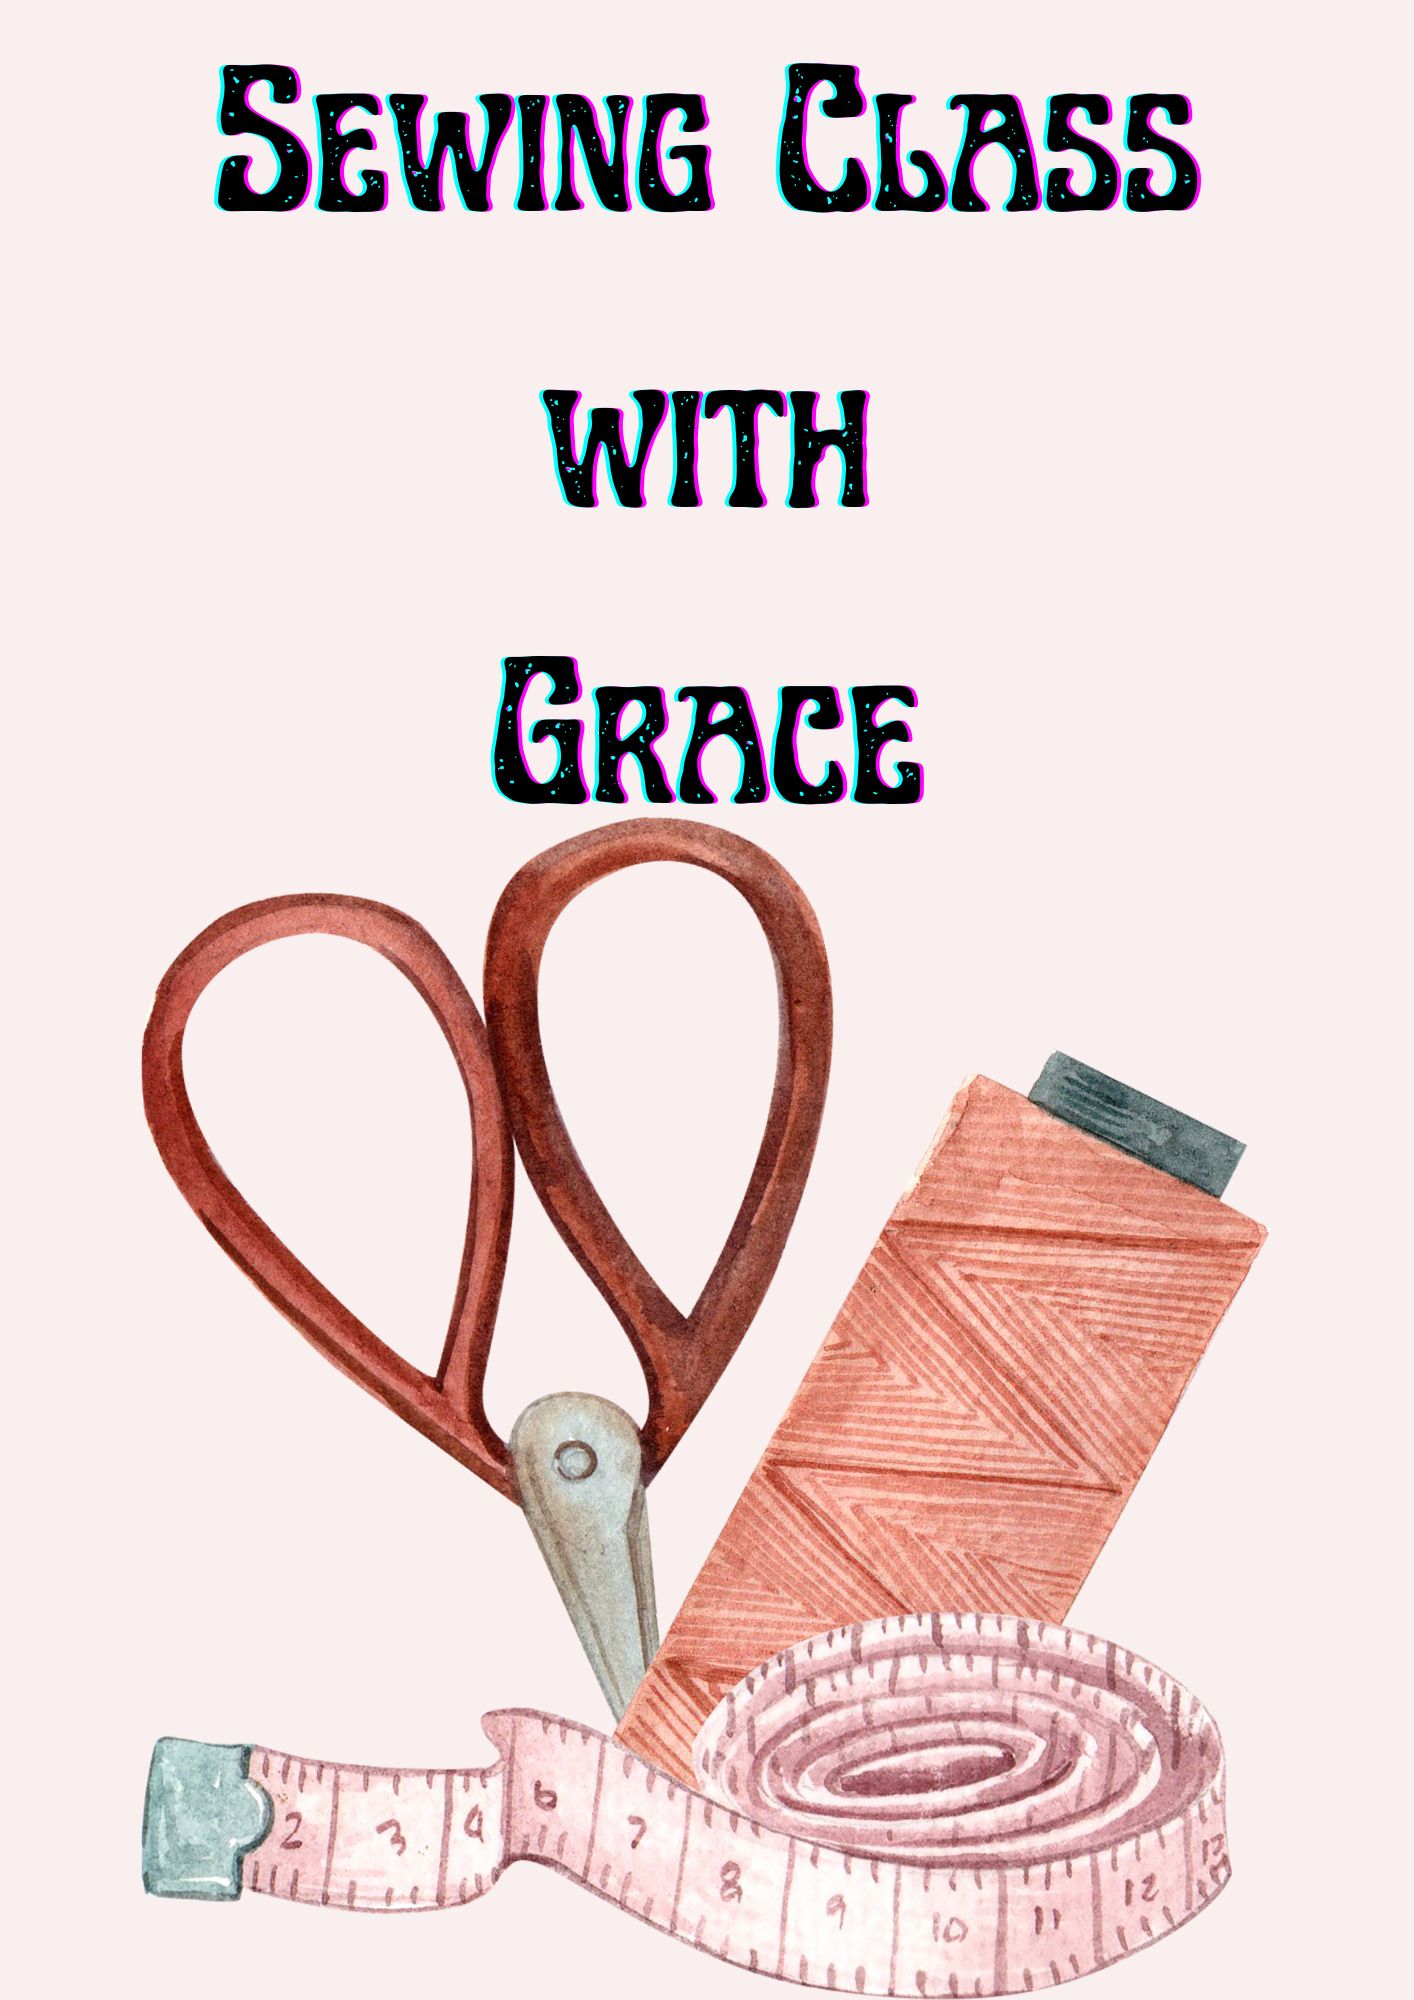 Sewing Class with Grace! Ages 13+. Must Register. Learn the basics. Saturday, May 4 10:30 AM - 12:30 AM